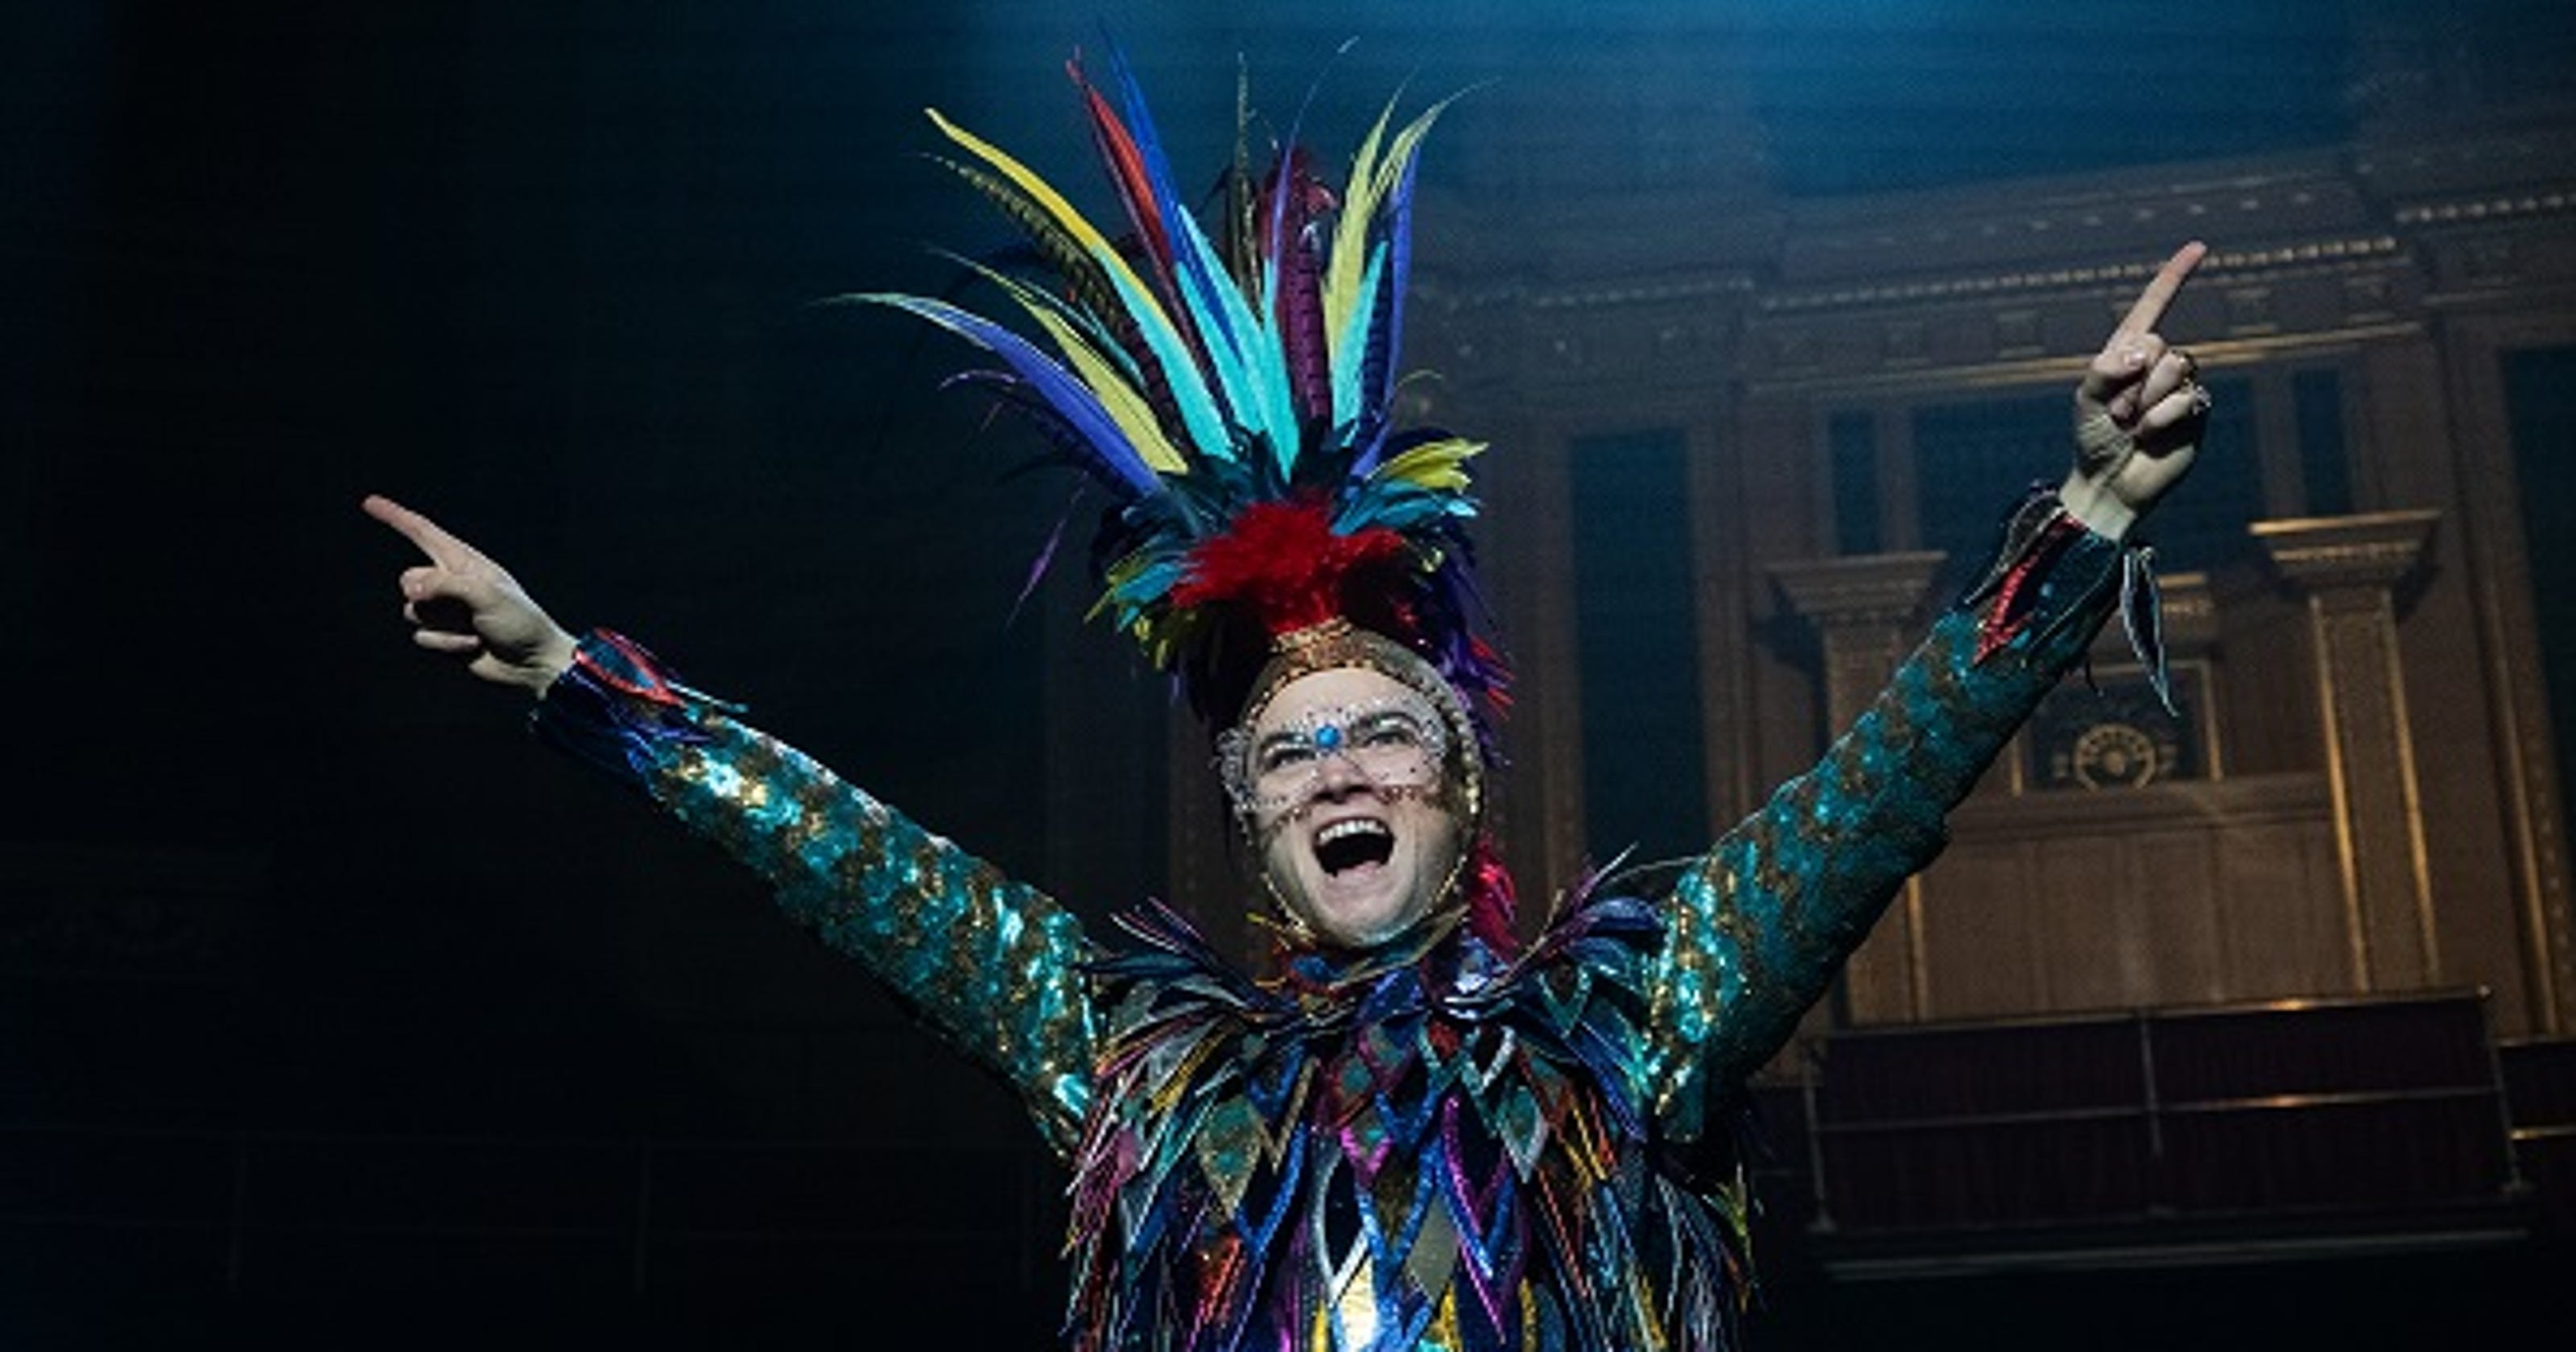 'Rocketman': Elton John's outrageous outfits are the shining stars